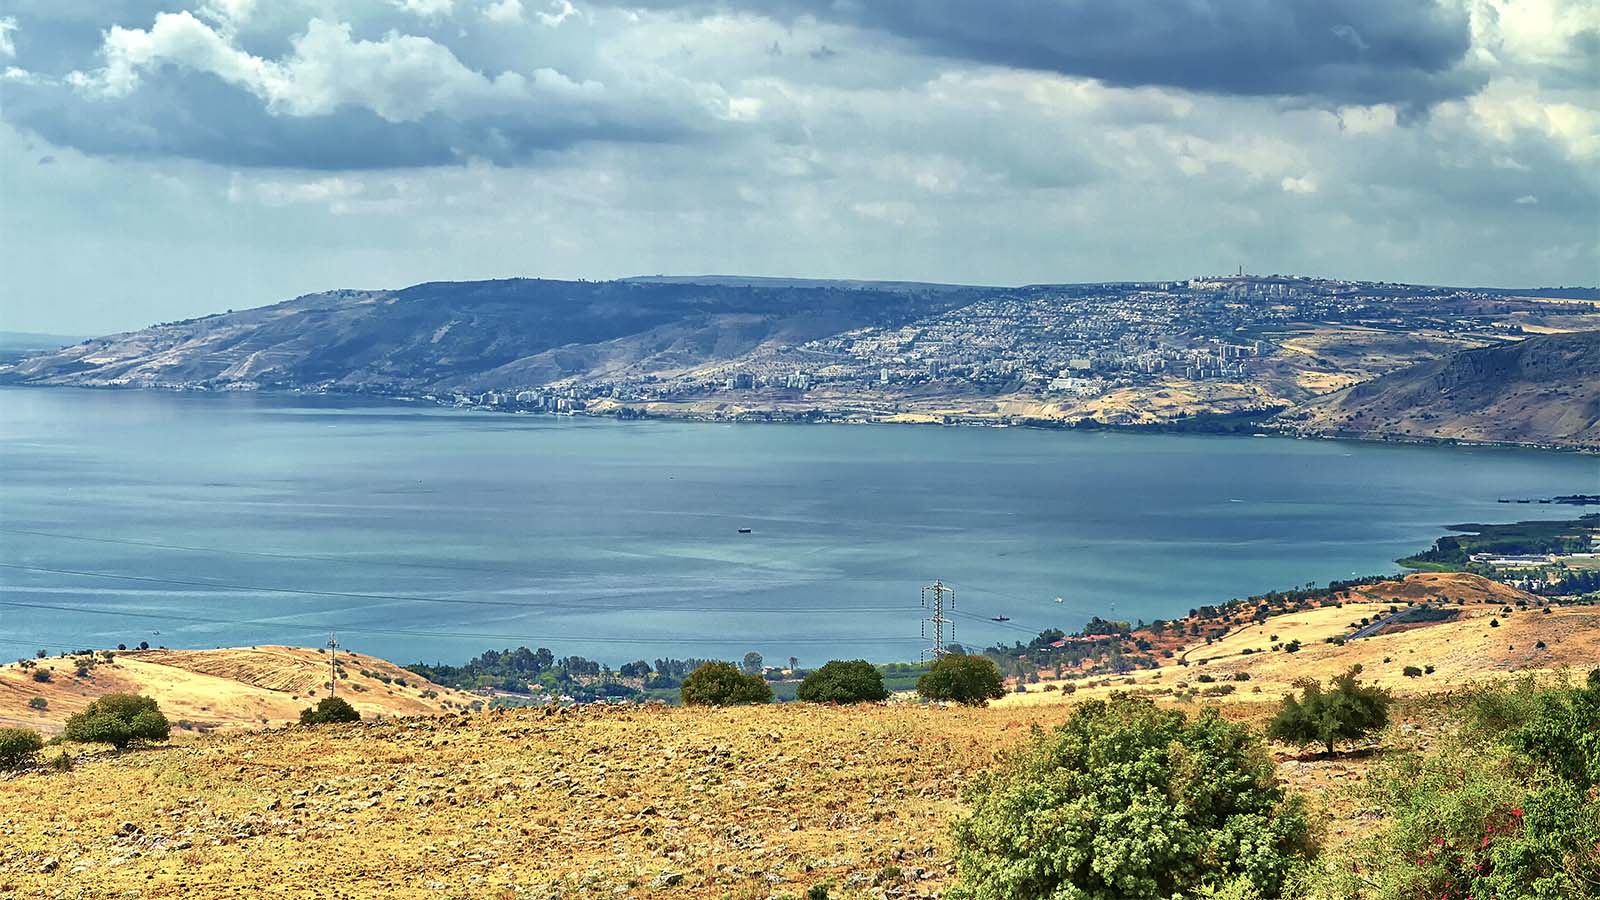 The Sea of Galilee, or the Kinneret, in the north of Israel (Photograph: Shutterstock)